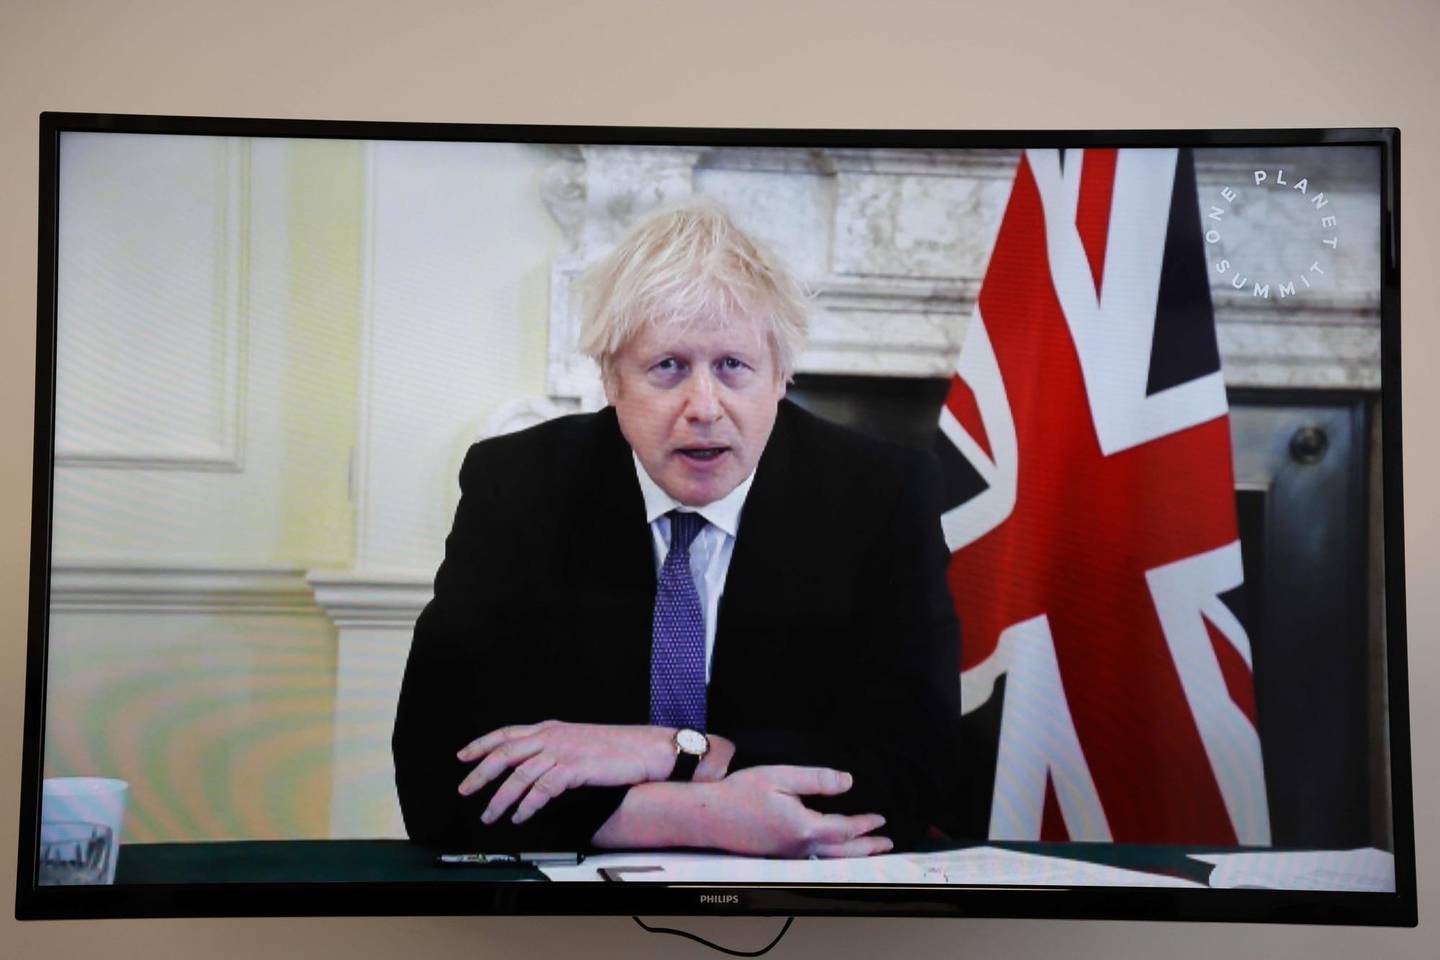 Britain's Prime Minister Boris Johnson speaks during a video conference at the One Planet Summit, part of World Nature Day, at the Reception Room of the Elysee Palace, in Paris, on January 11, 2021. - The One Planet Summit, a largely virtual event hosted by France in partnership with the United Nations and the World Bank, will include French President, German Chancellor and European Union chief. (Photo by Ludovic MARIN / various sources / AFP)